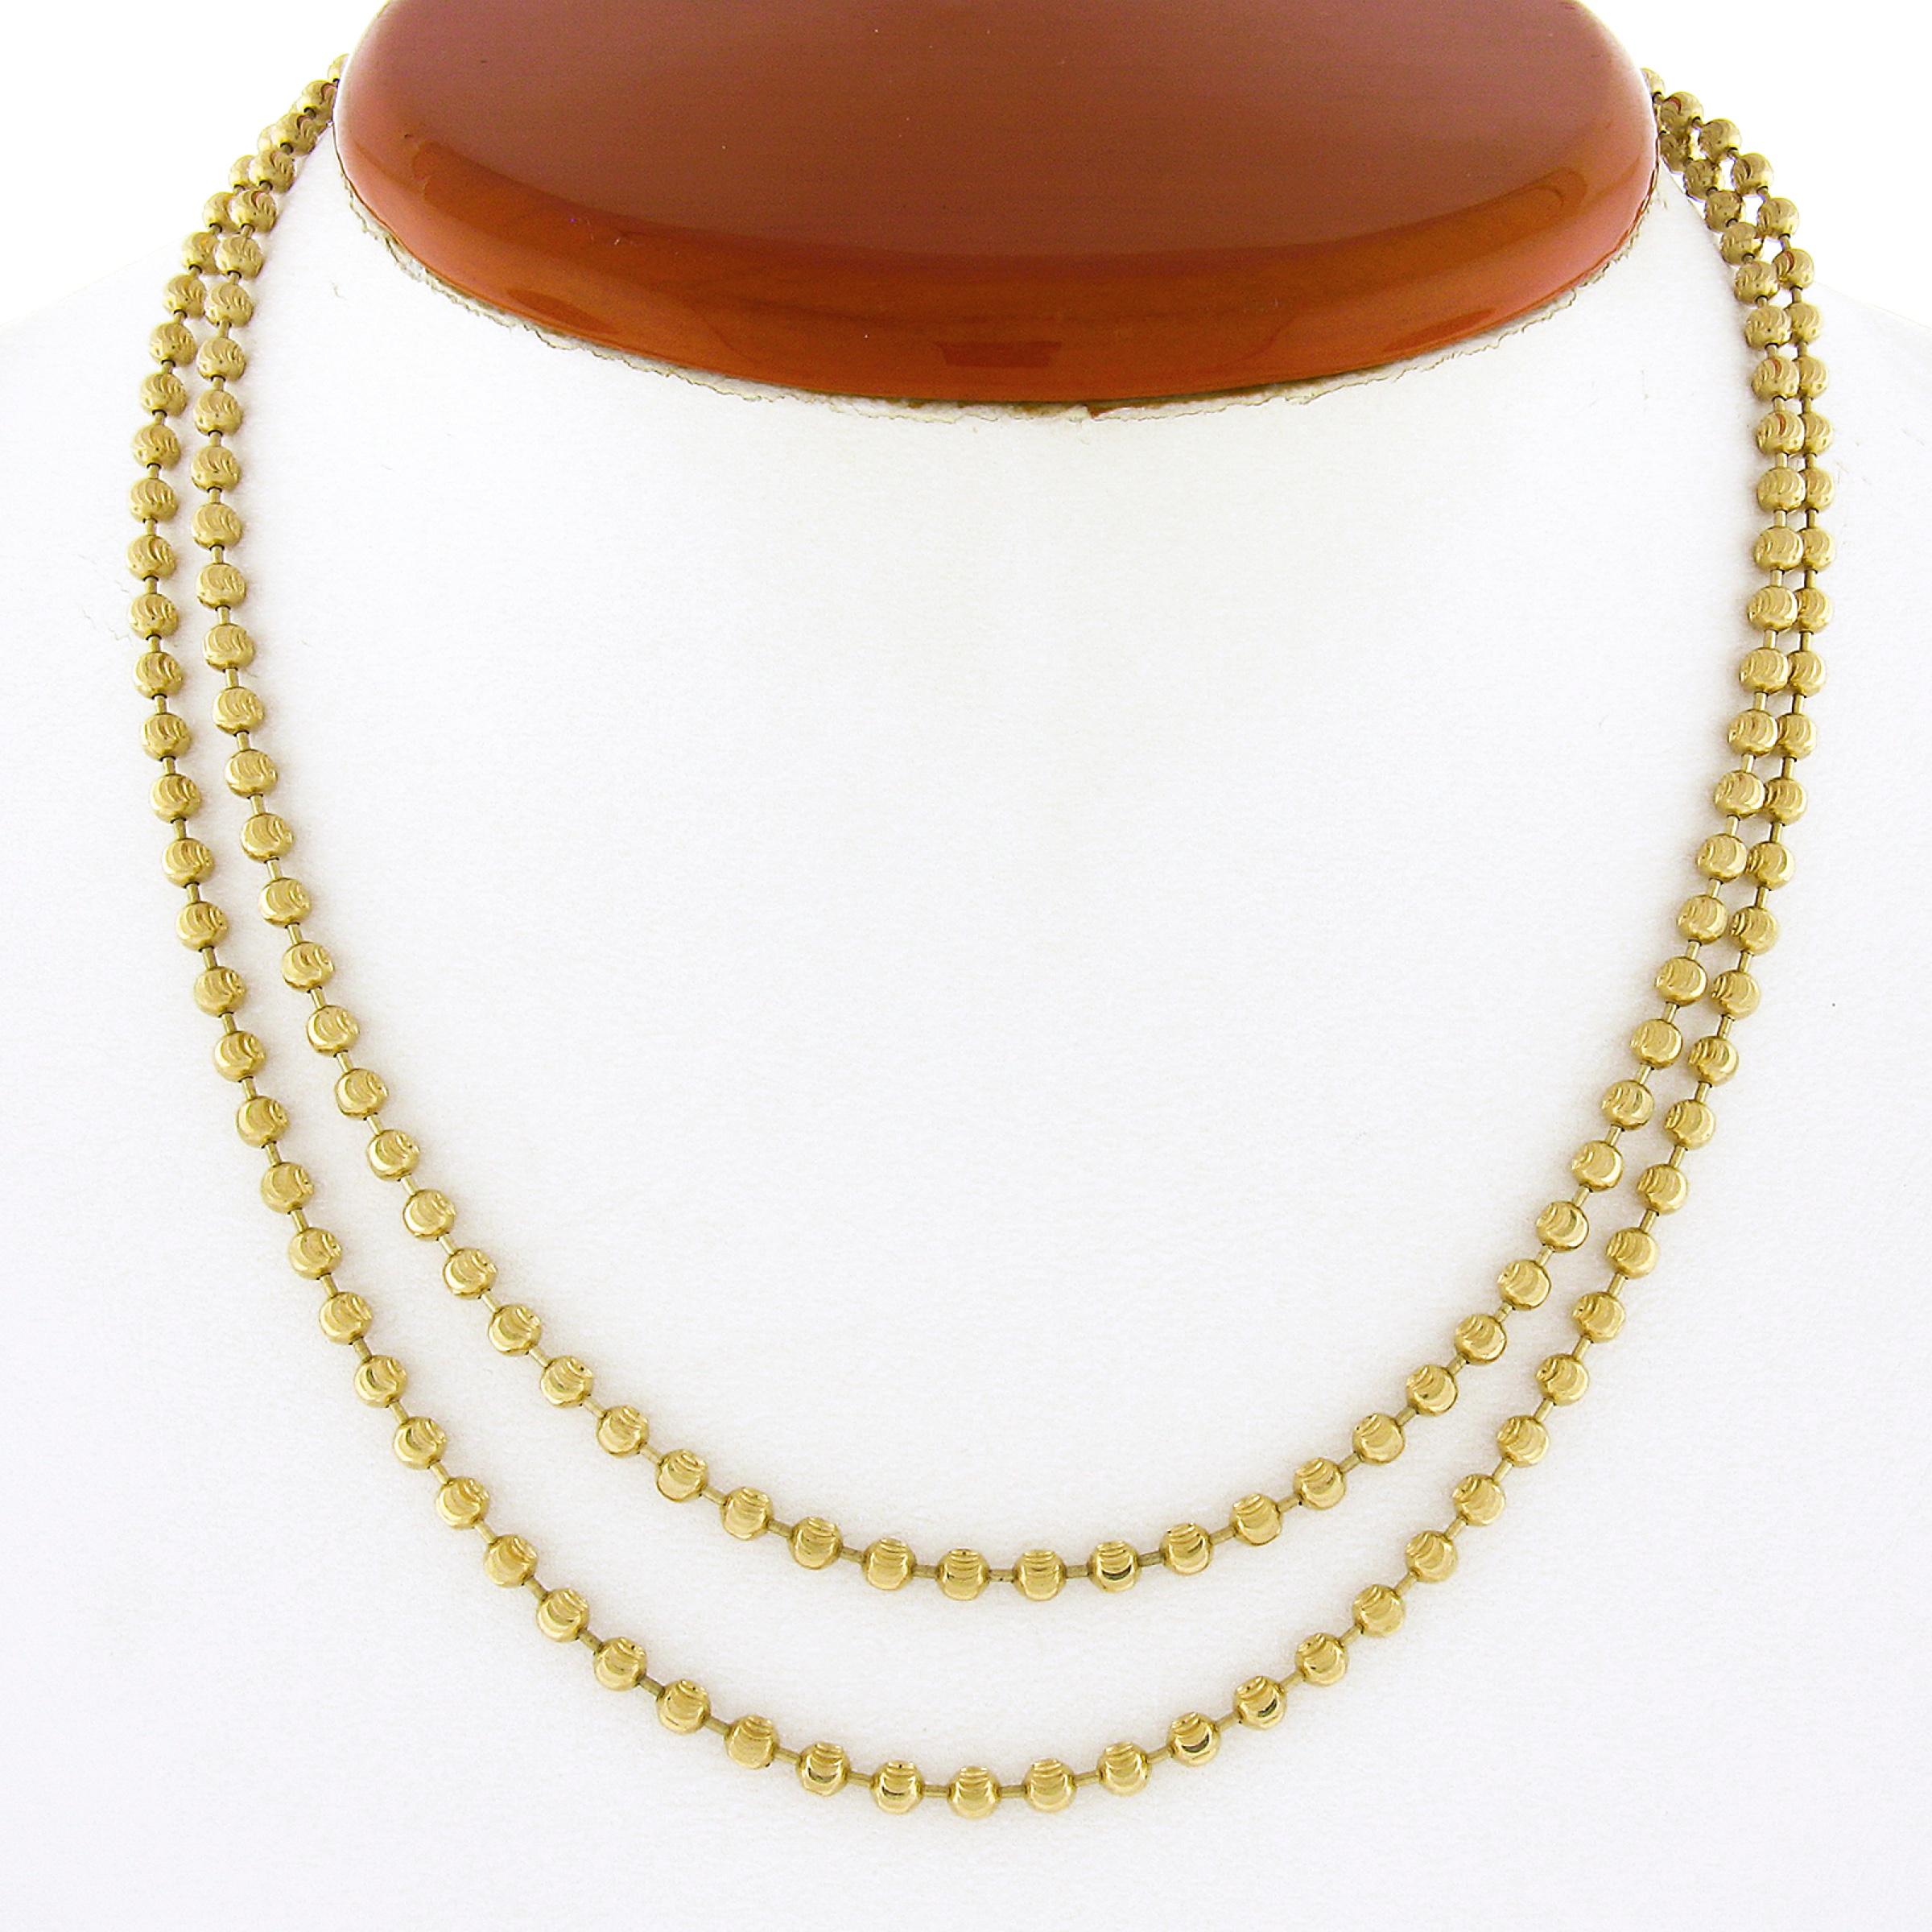 This fine bead/ball link chain necklace is very well crafted in solid 14k yellow gold. The long necklace is 30.5 inches in length, 2.9mm thick, and is secured with a sturdy lobster claw clasp that ensures safe wear. The moon cutting technique on the